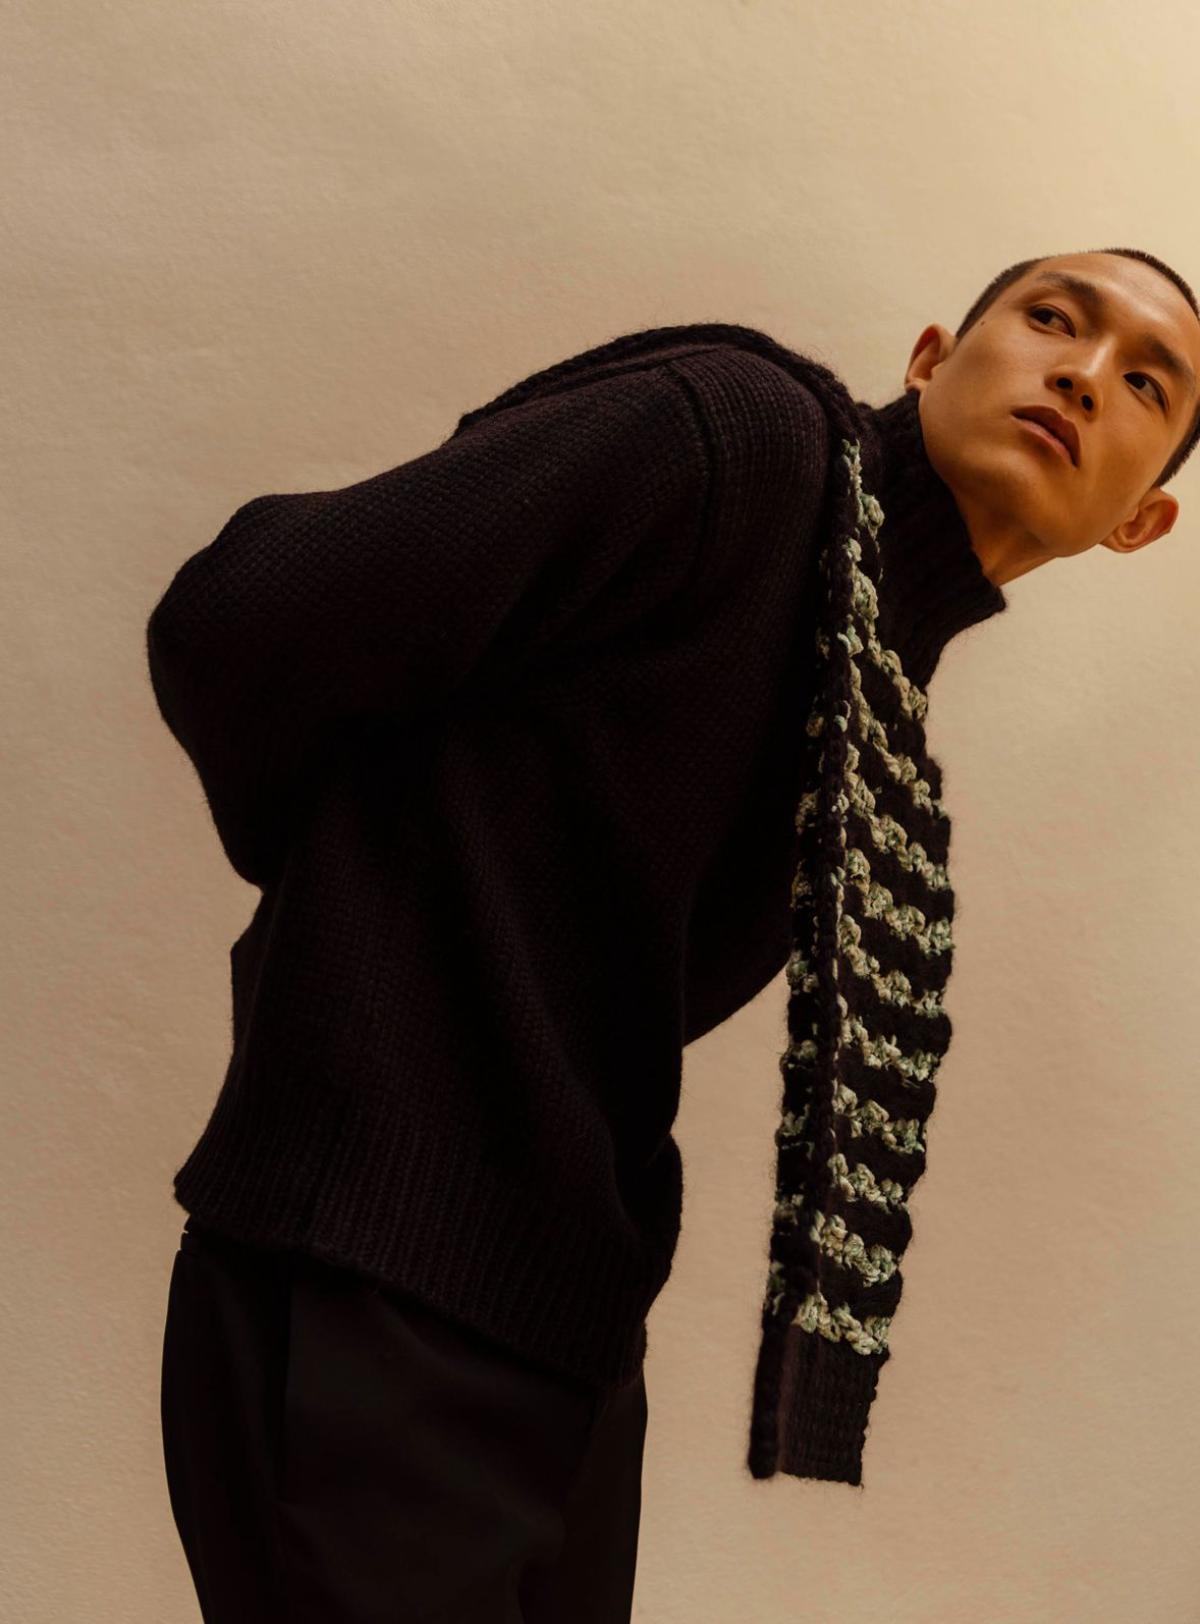 Jil Sander Luxe Minimalism: Zhang Wenhui by Clement Pascal for Matches Fashion Fall-Winter 2022 Ad Campaign